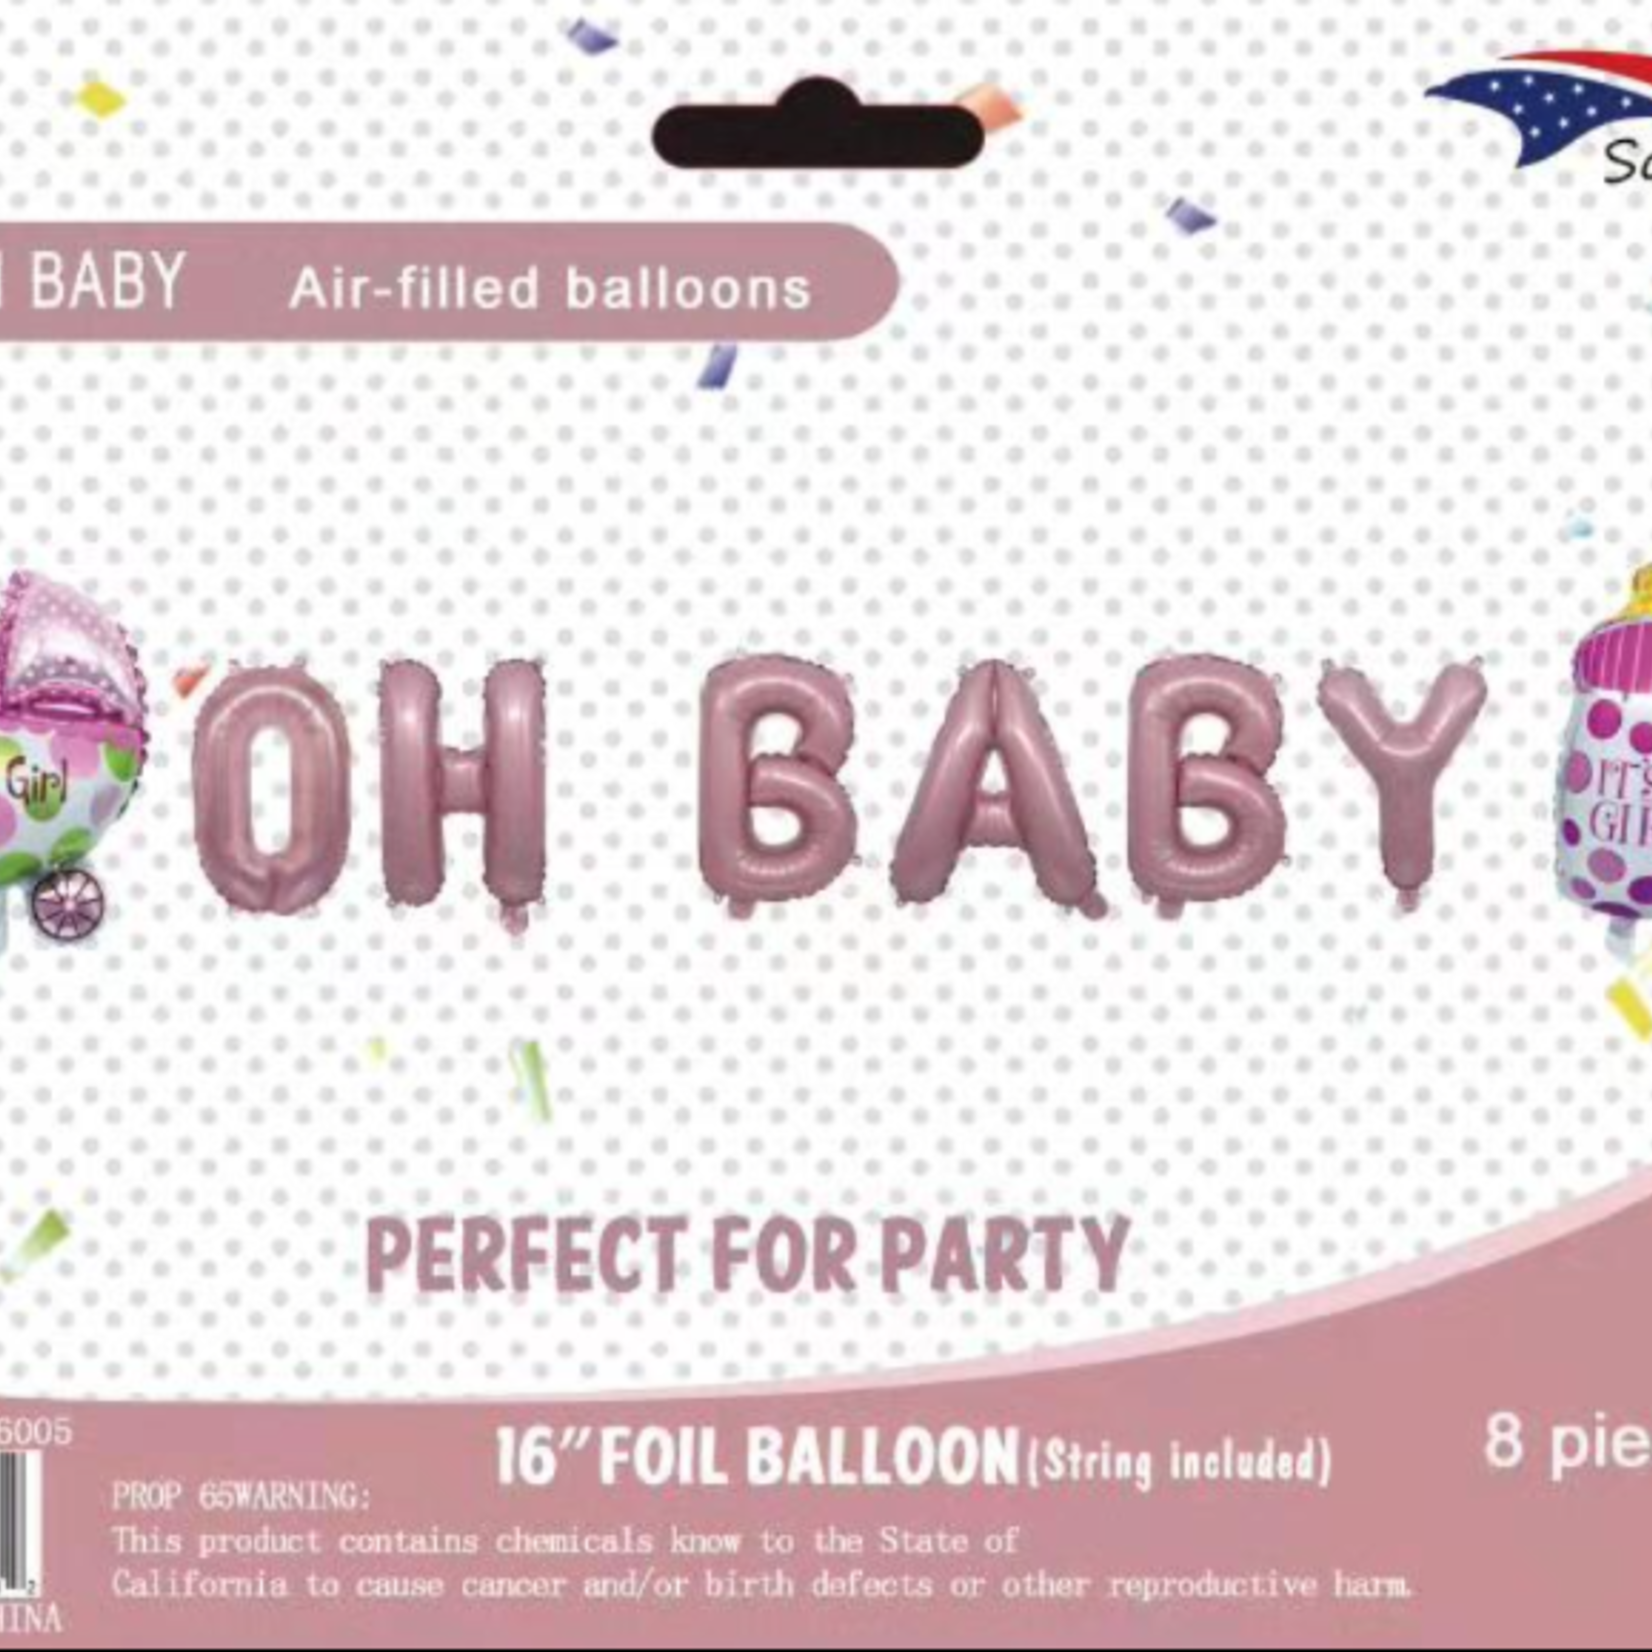 PINK "OH BABY" BALLOON BANNER